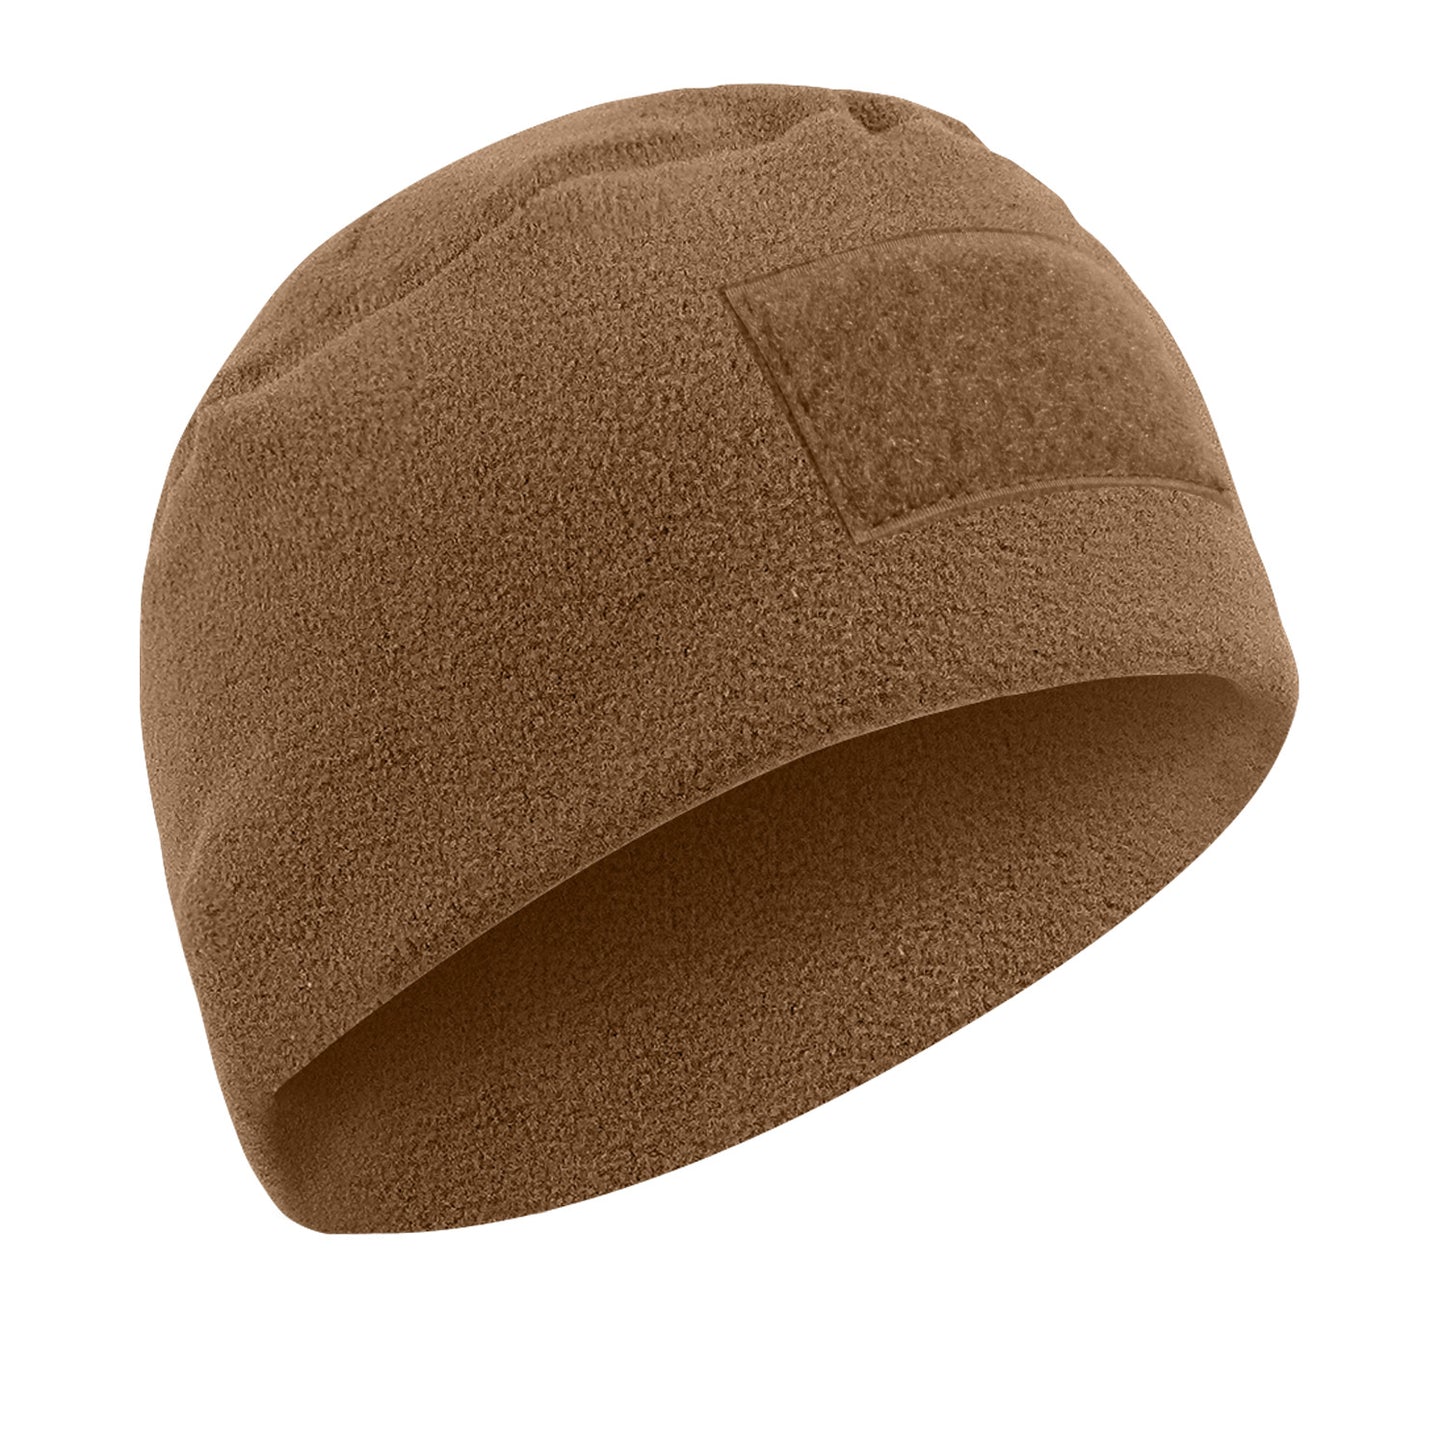 Tactical Beanie With Velcro For Patches is constructed with extra warm polar fleece material that will keep you warm whether you are tackling the great outdoors or on the airsoft field.   Extra Warm Polar Fleece Material Keeps You Warm Even In The Harshest Environments Fully Customizable Beanie with 8xx5cm Loop Field For Attaching Flag Or Morale Patches (Patches Sold Separately) Low Profile Design Can Fit Comfortably Under A Helmet One Size Fits Most